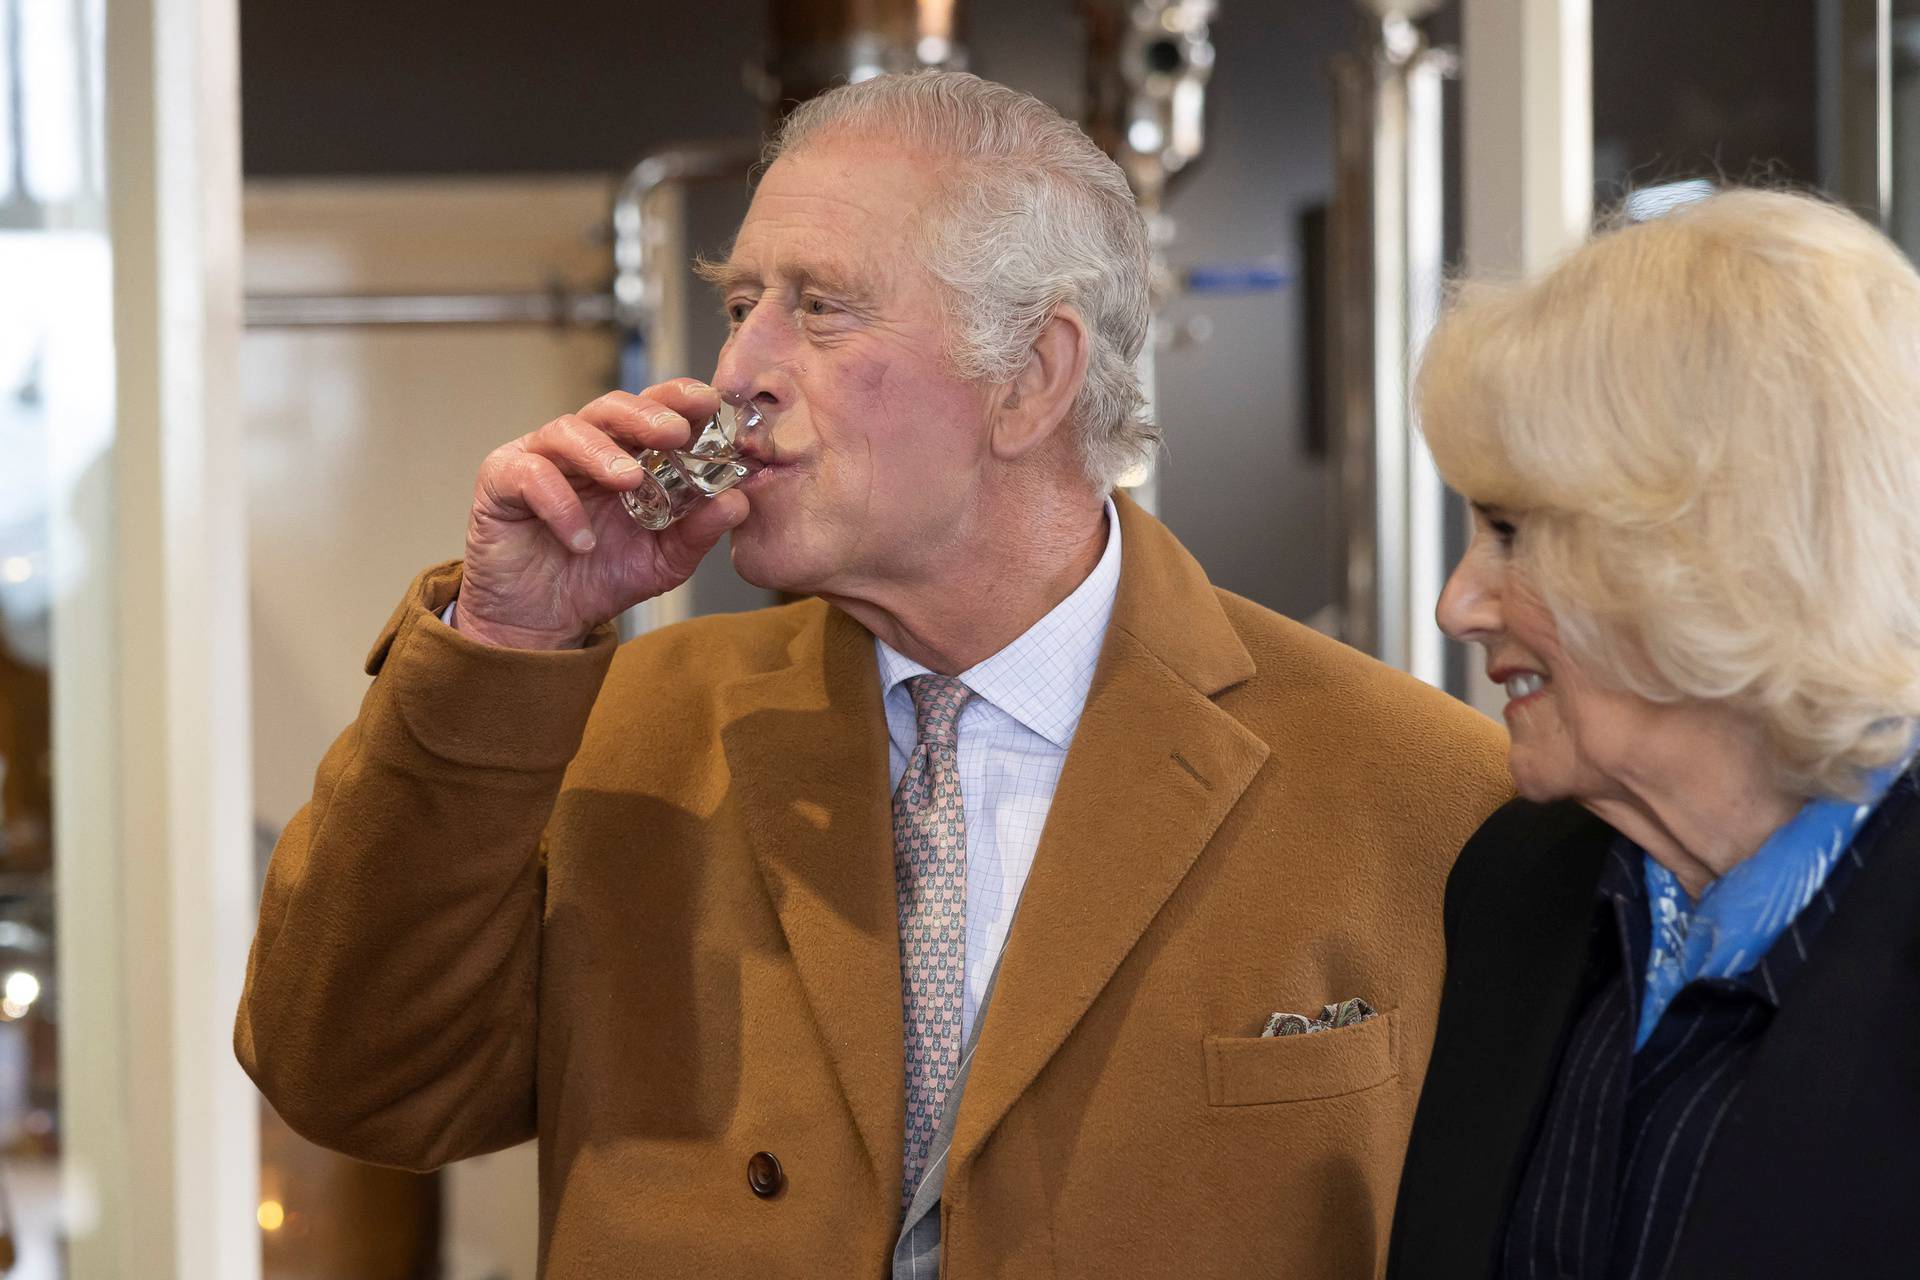 Britain's King Charles and Camilla, Queen Consort, visit Talbot Yard Food Court in Yorkshire